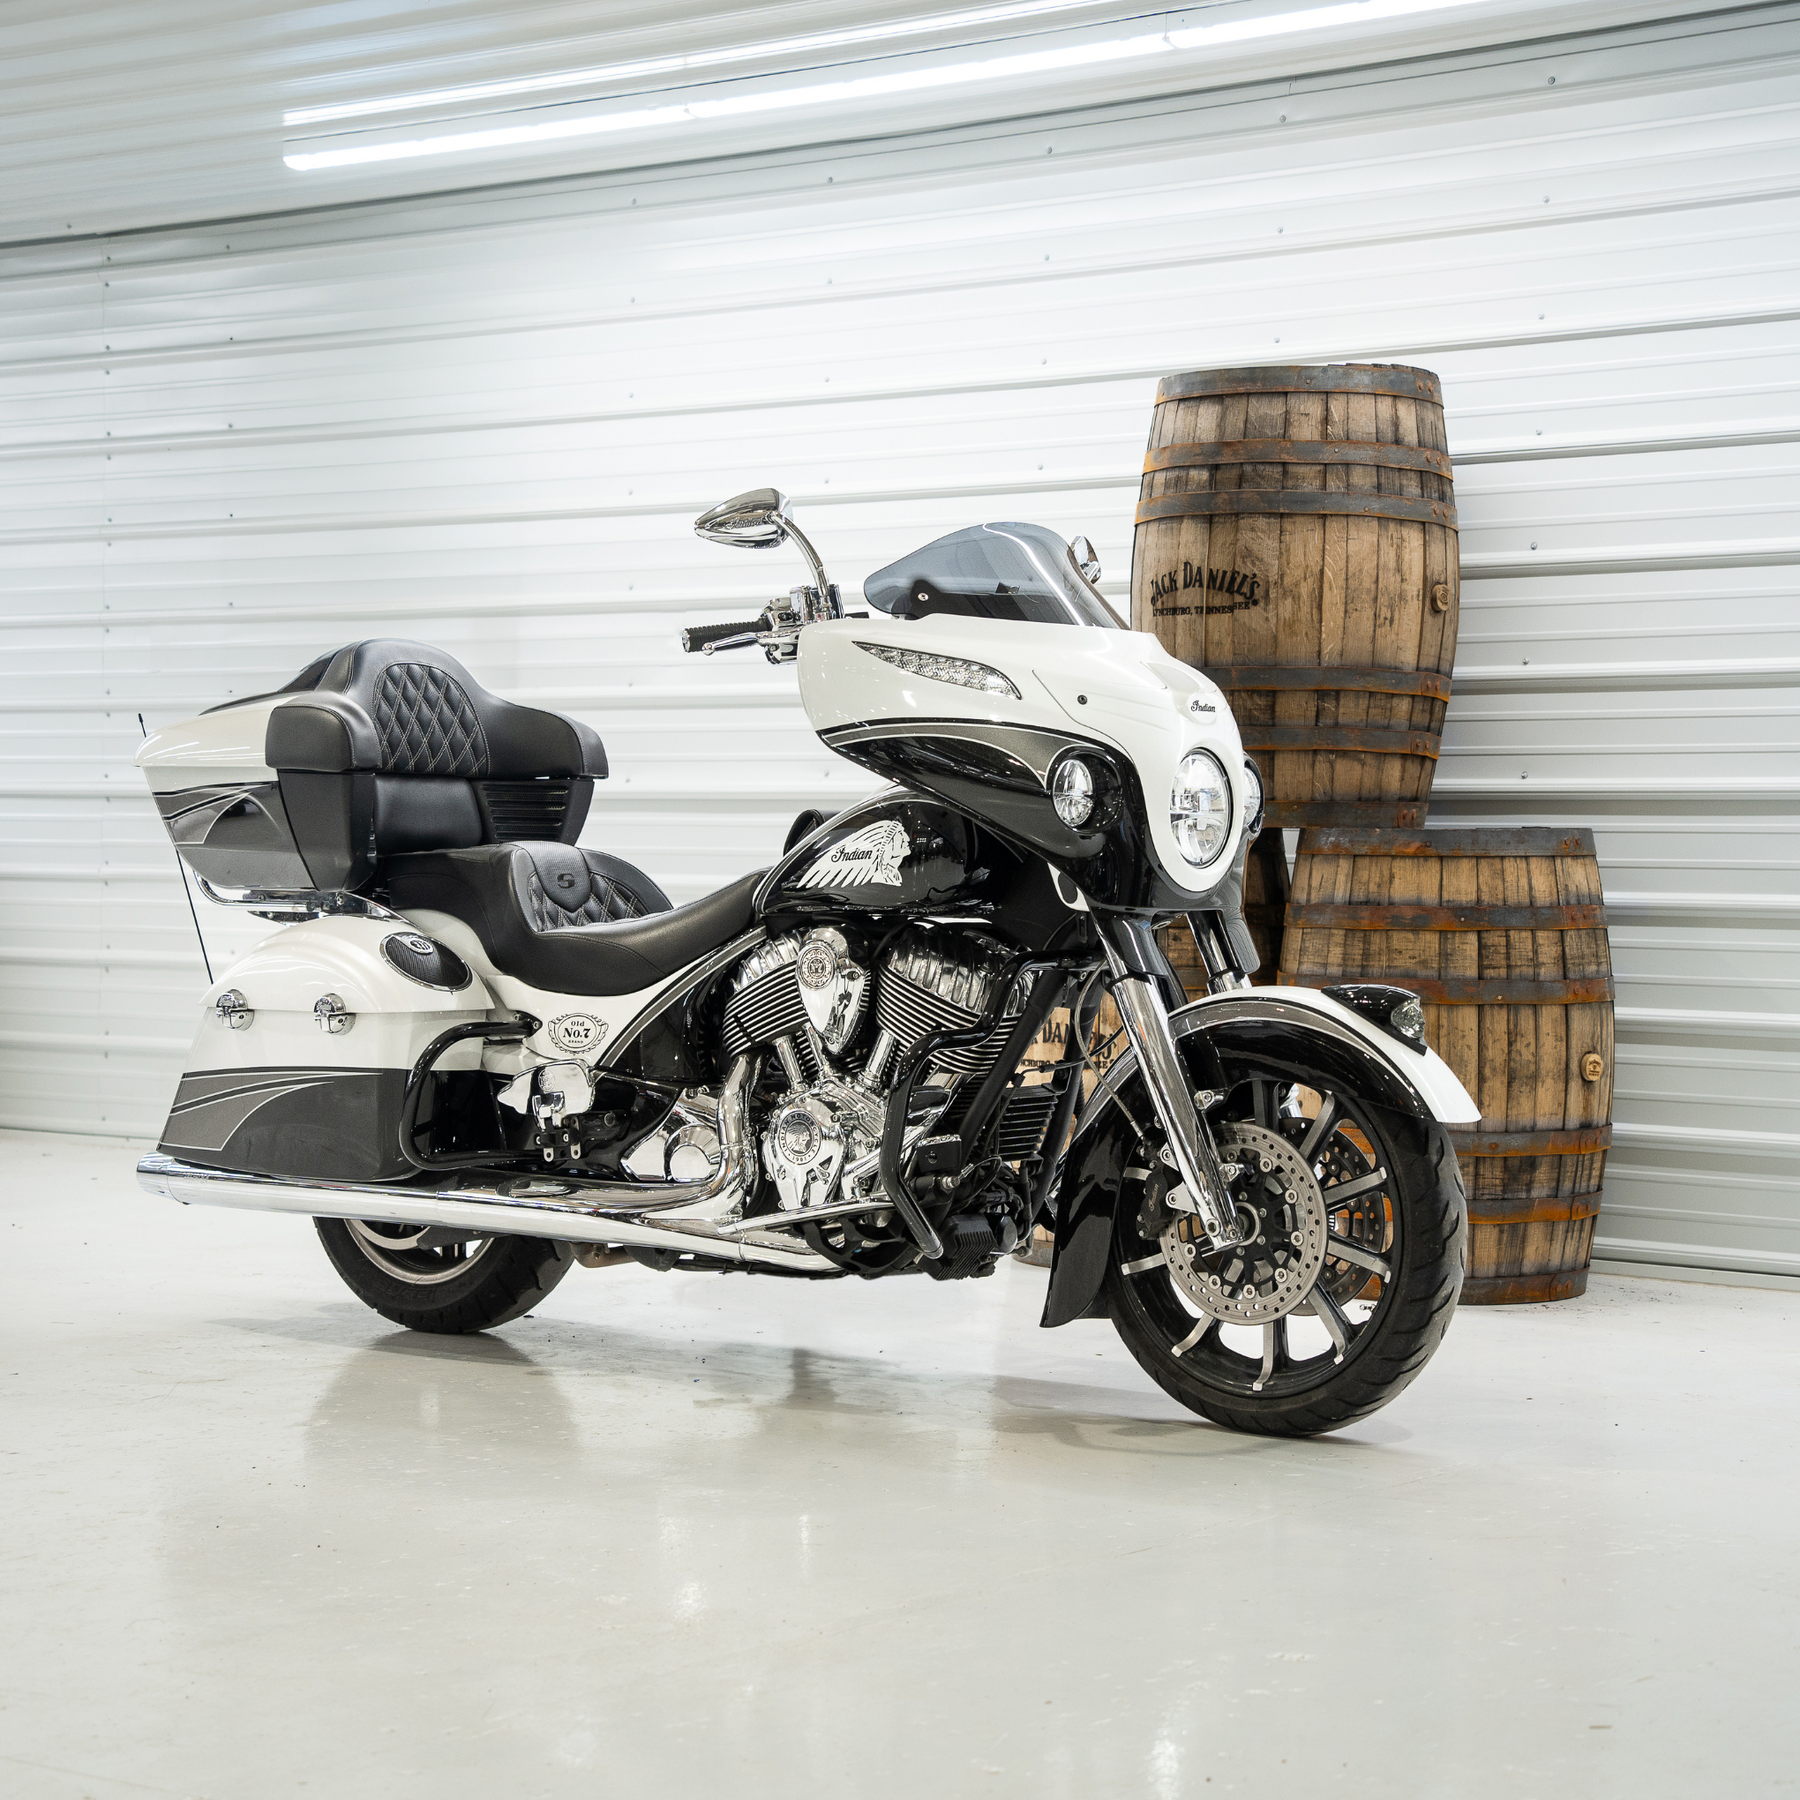 (2017 Jack Daniel's Limited Edition Indian Chieftain)